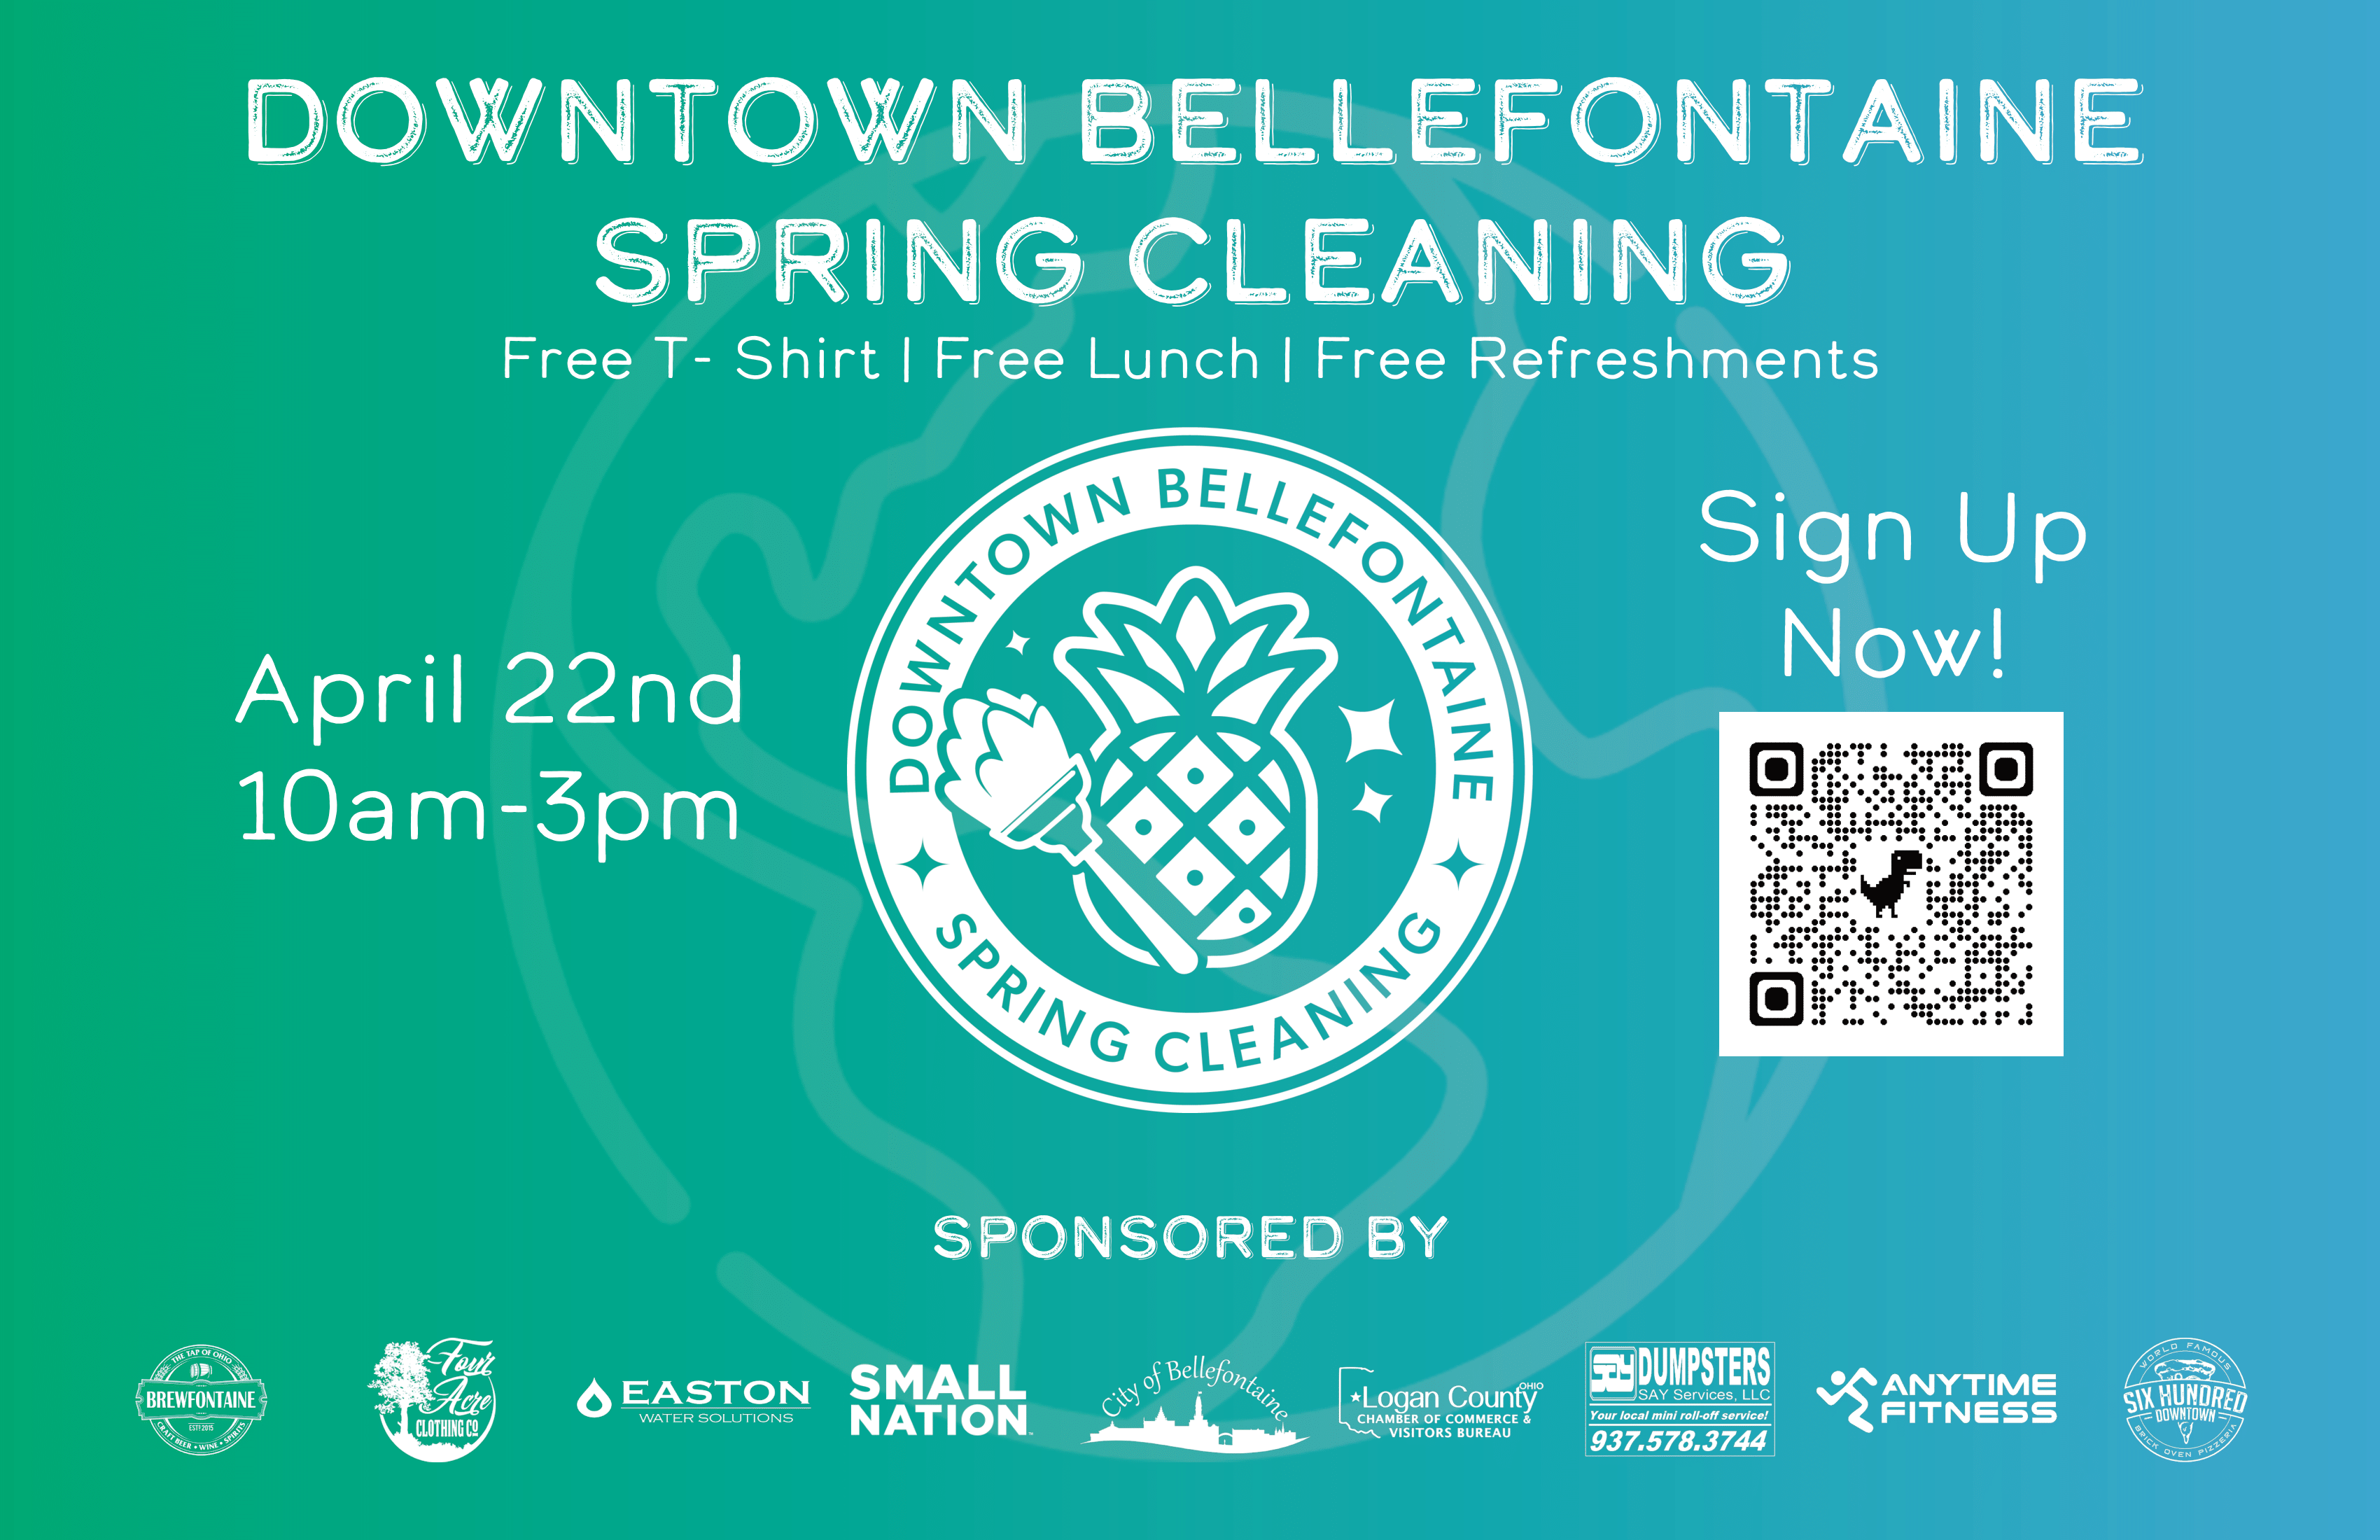 Downtown Bellefontaine Spring Cleaning